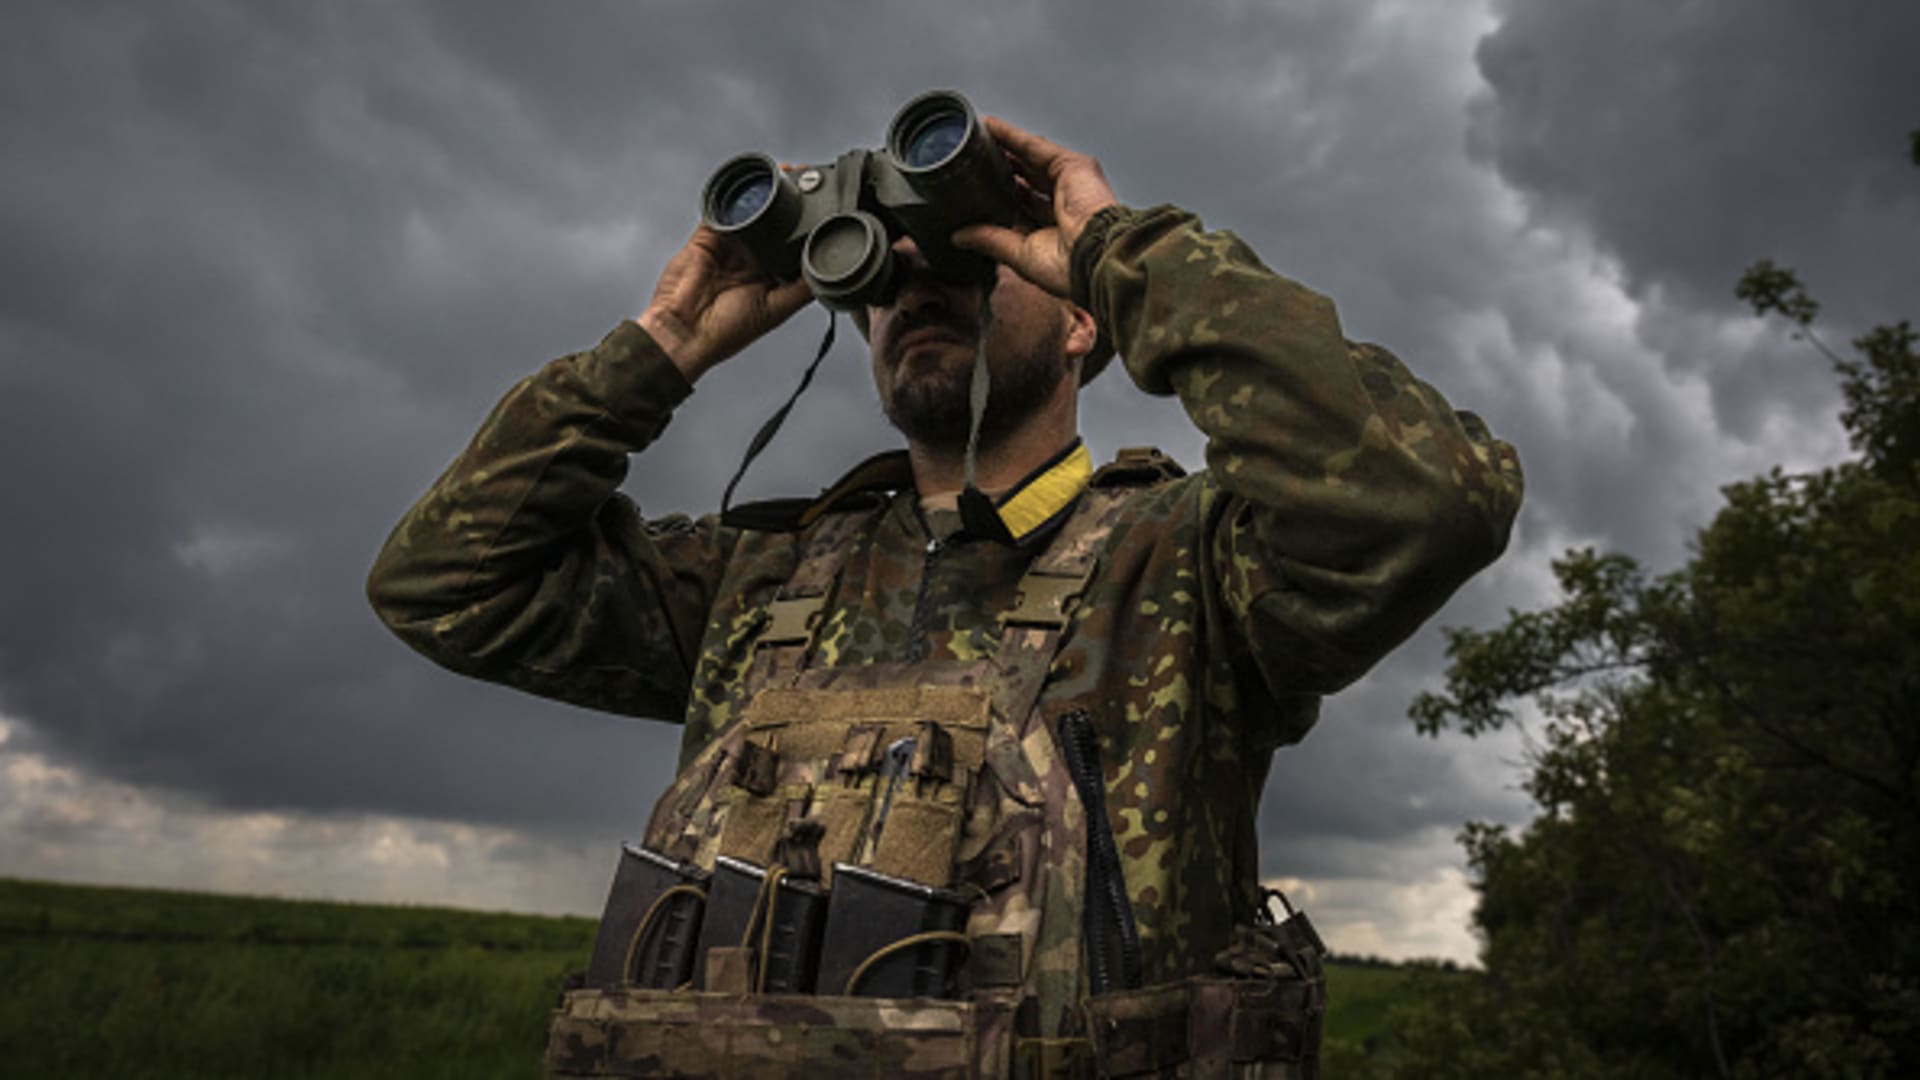 A Ukrainian soldier scouts the area with binoculars on the front line in Donetsk.